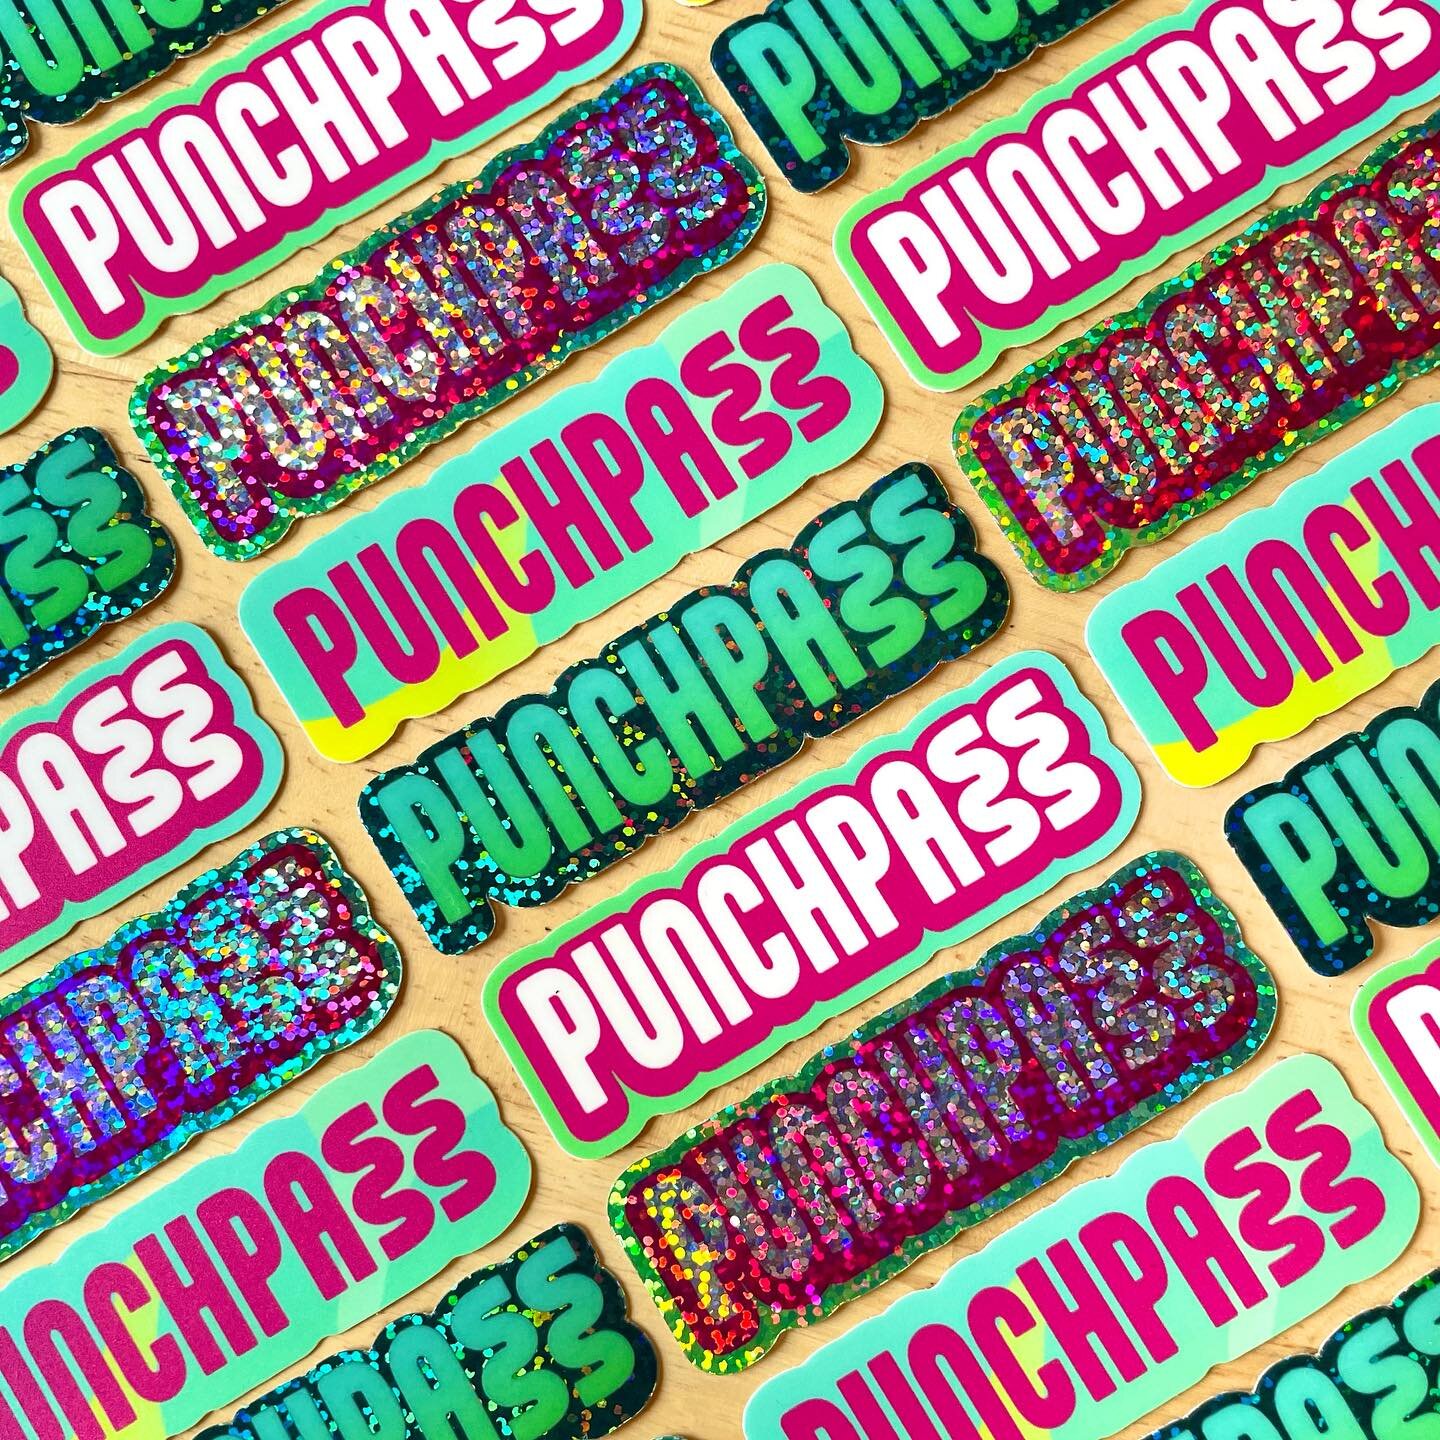 The new logo for @punchpass was designed to reflect the passion and care at the heart of the Punchpass brand. 

Inspired by the brand&rsquo;s purpose of empowering independence and community, those cheeky little &ldquo;squiggles&rdquo; in the Ss sign